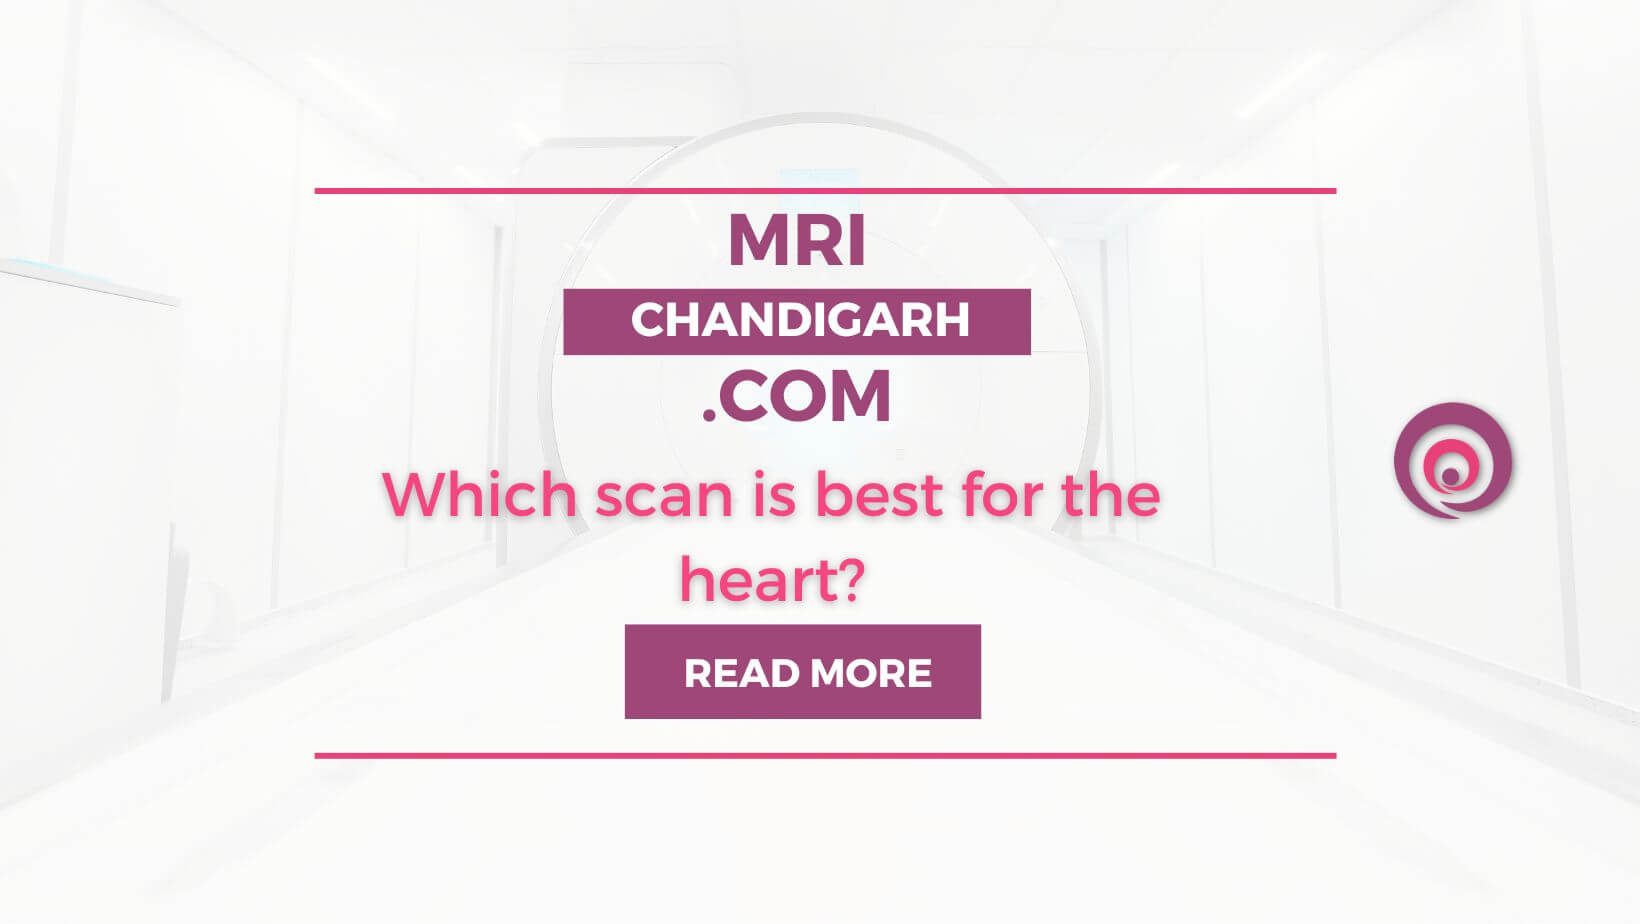 Which scan is best for heart?